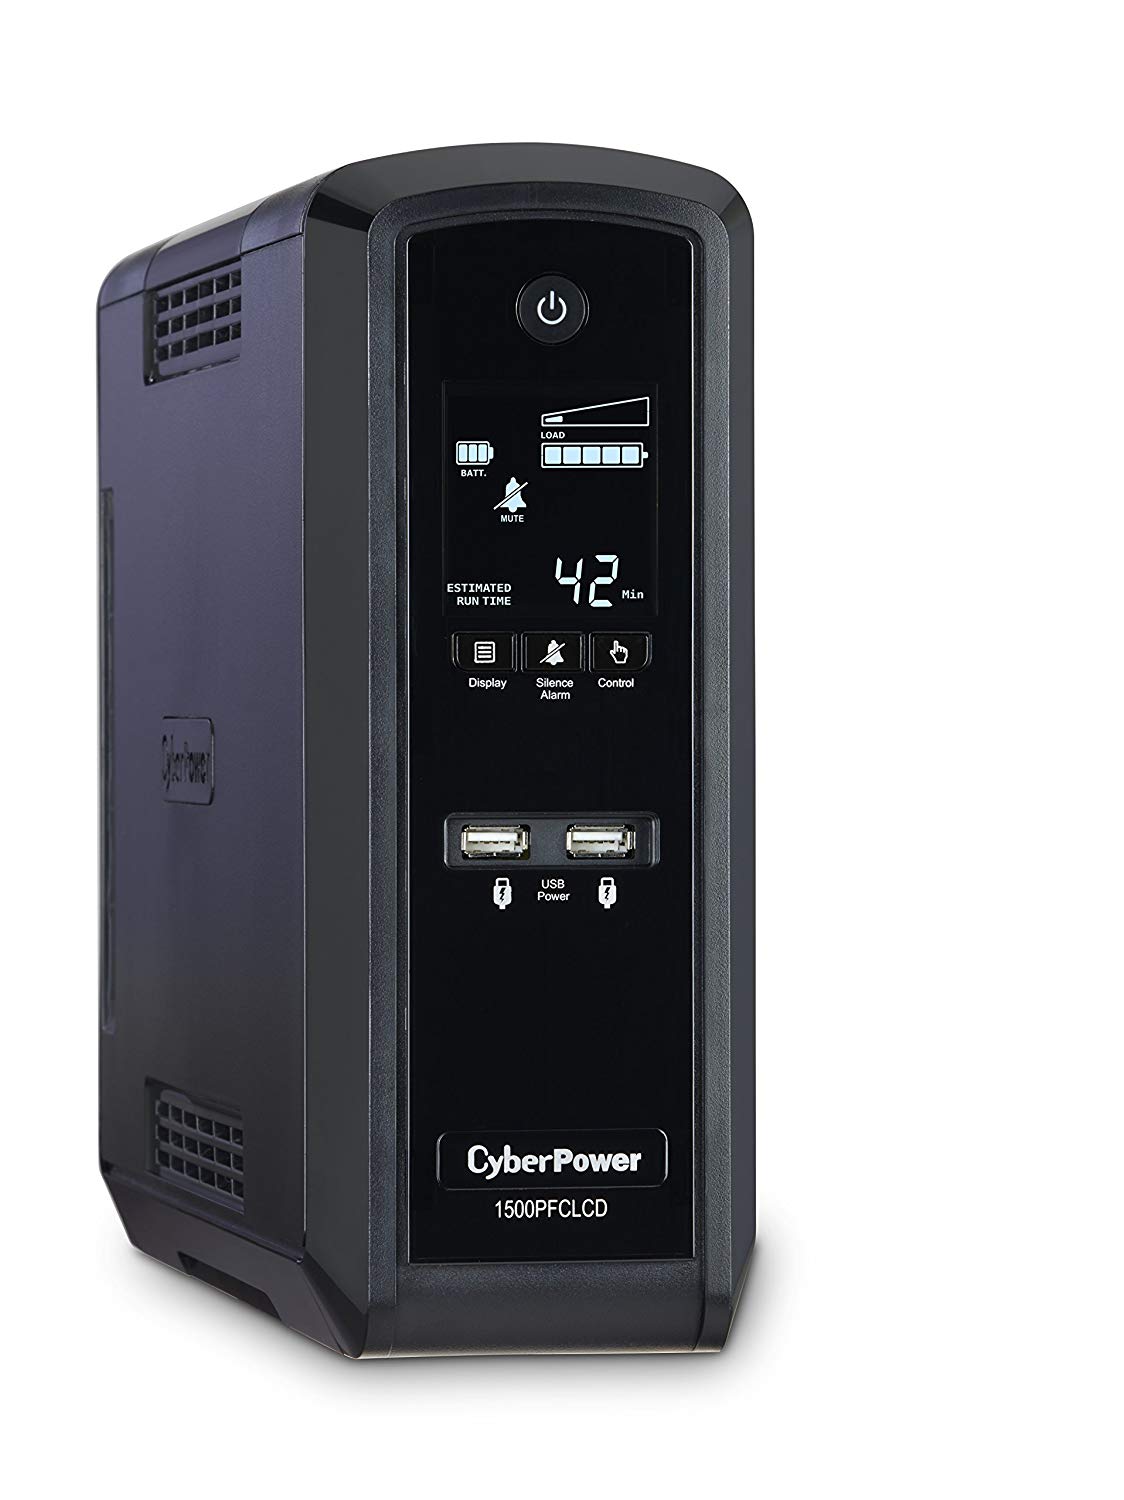 Cyber Power CyberPower CP1500PFCLCD PFC Sinewave UPS System, 1500VA/900W, 10 Outlets, AVR, Mini-Tower